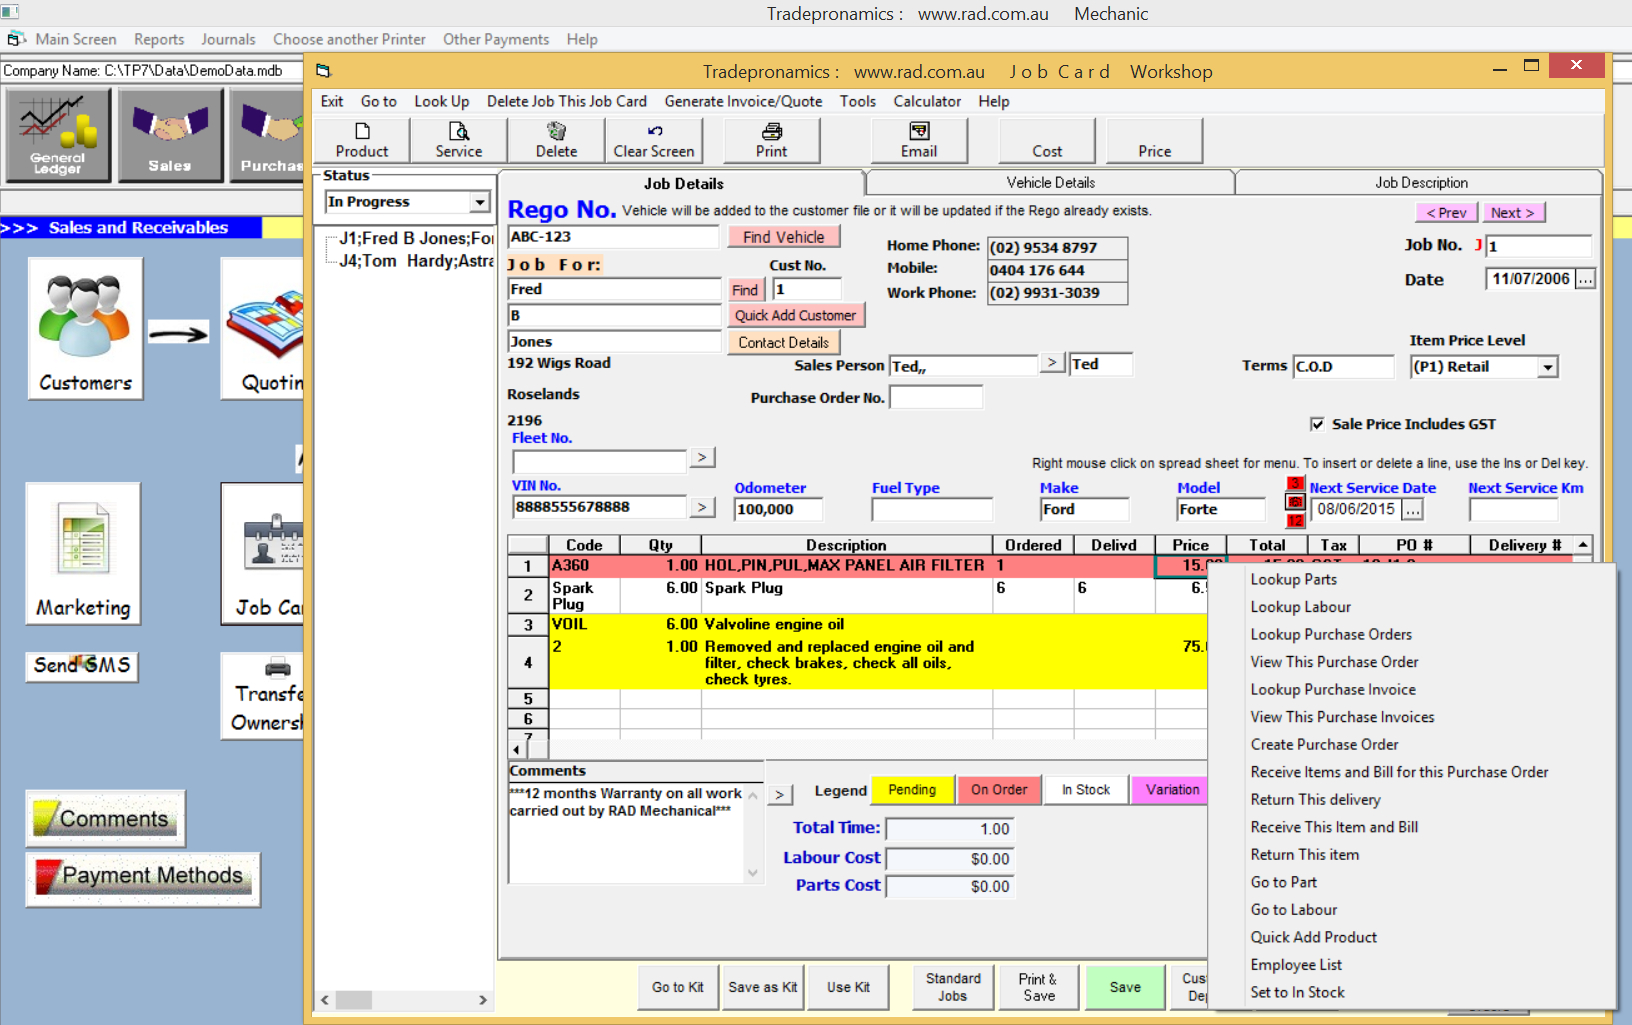 Auto Repair Invoice Software | Workshop Manager Software Intended For Mechanic Job Card Template